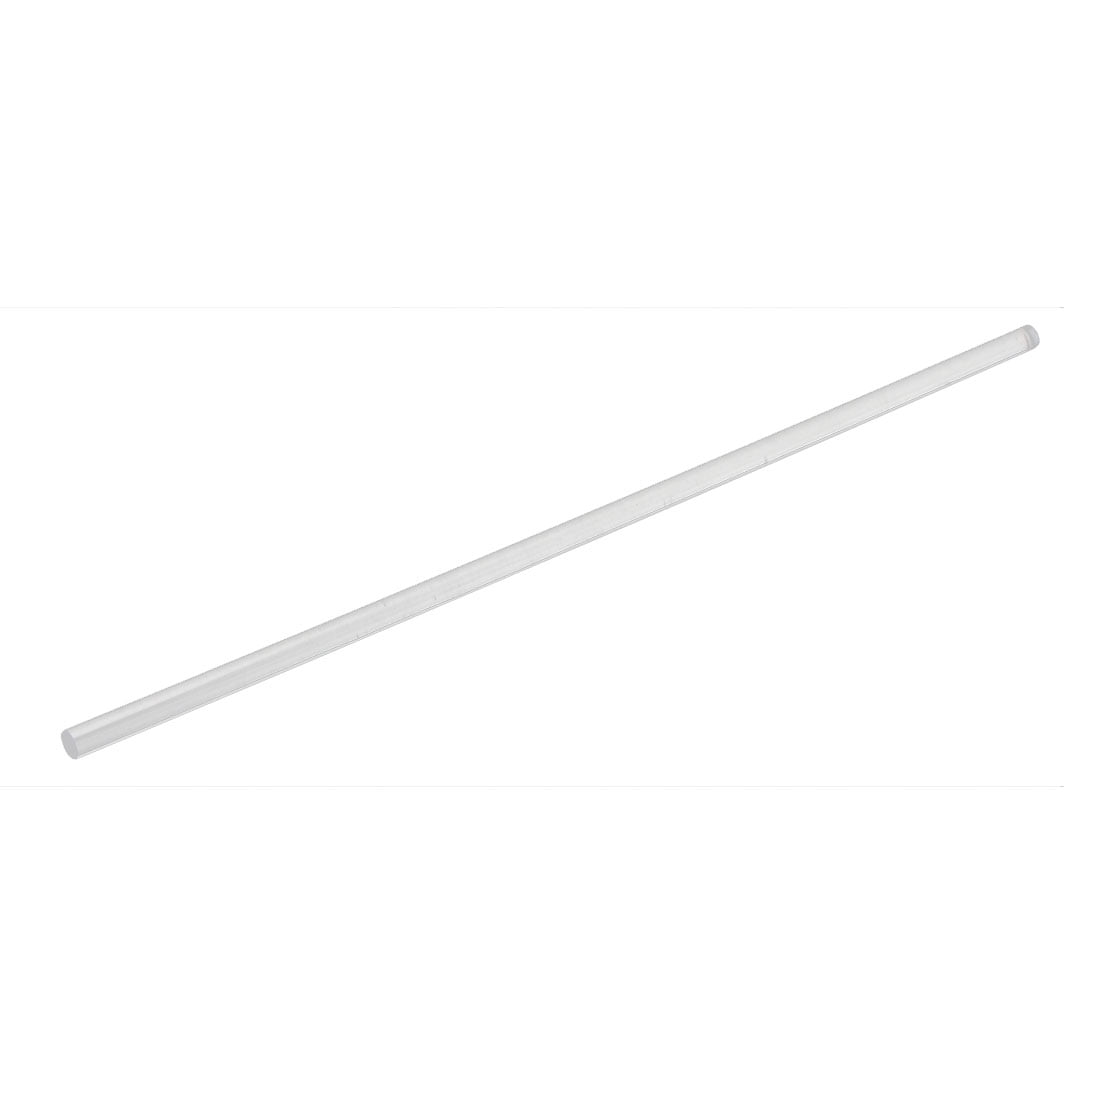 uxcell 18mm Dia 10 Inch Long Solid Acrylic Round Rod PMMA Bar Clear